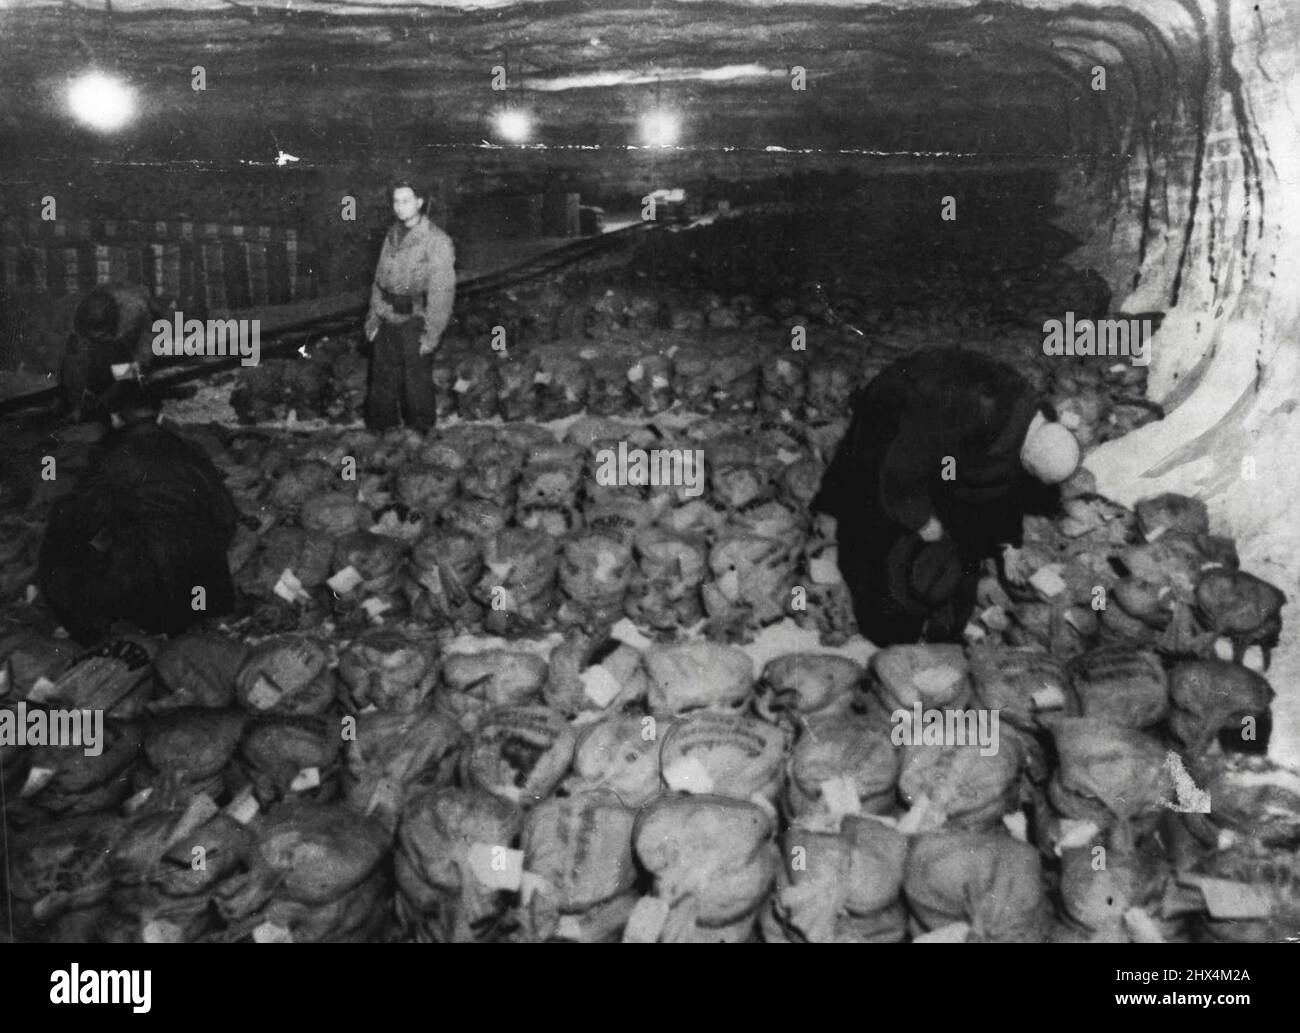 Third U.S. Army Captures Reich Gold Reserve -- A Reichsbank official (right), taken into custody along with the mine's treasures, checks over the masses of labeled bags of money with finance corps men of the Third U.S. Army.what is believed to be the entire gold reserve of the German Reichsbank, hoards of German and Allied paper currency and priceless art treasures moved from Berlin were discovered in a salt mine in Markers, Germany, by troops of the Third U.S. Army April 7, 1945. It is estimated that 100 tons of gold bullion, probably all that Germany possesses, was stored in the underground Stock Photo